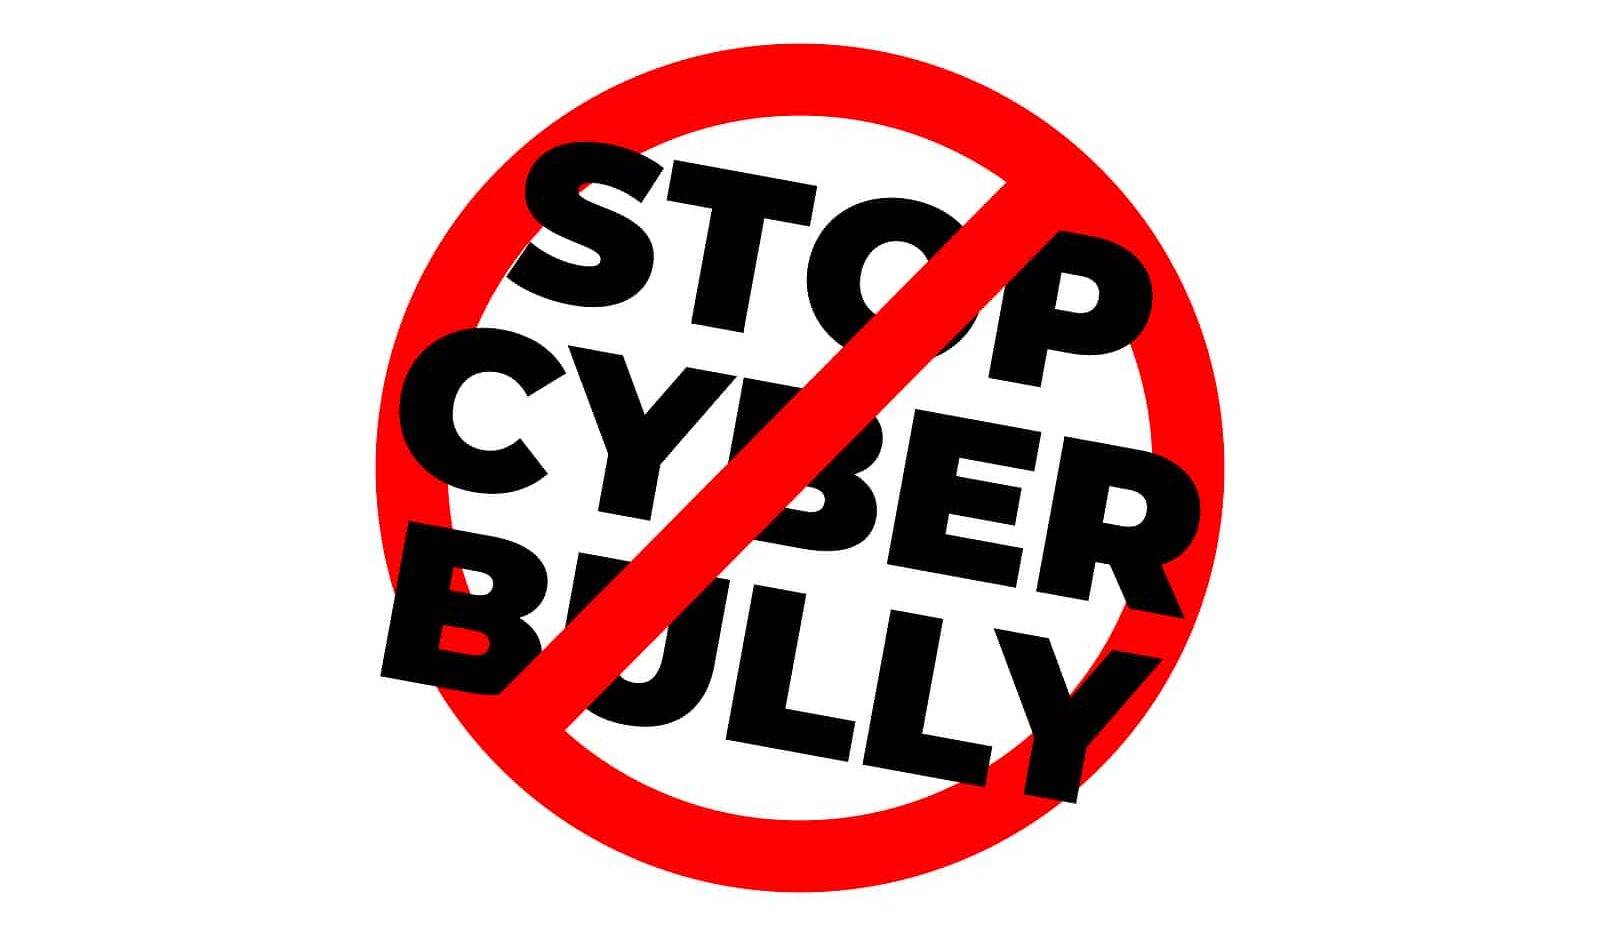 Stop Cyber Bullying 